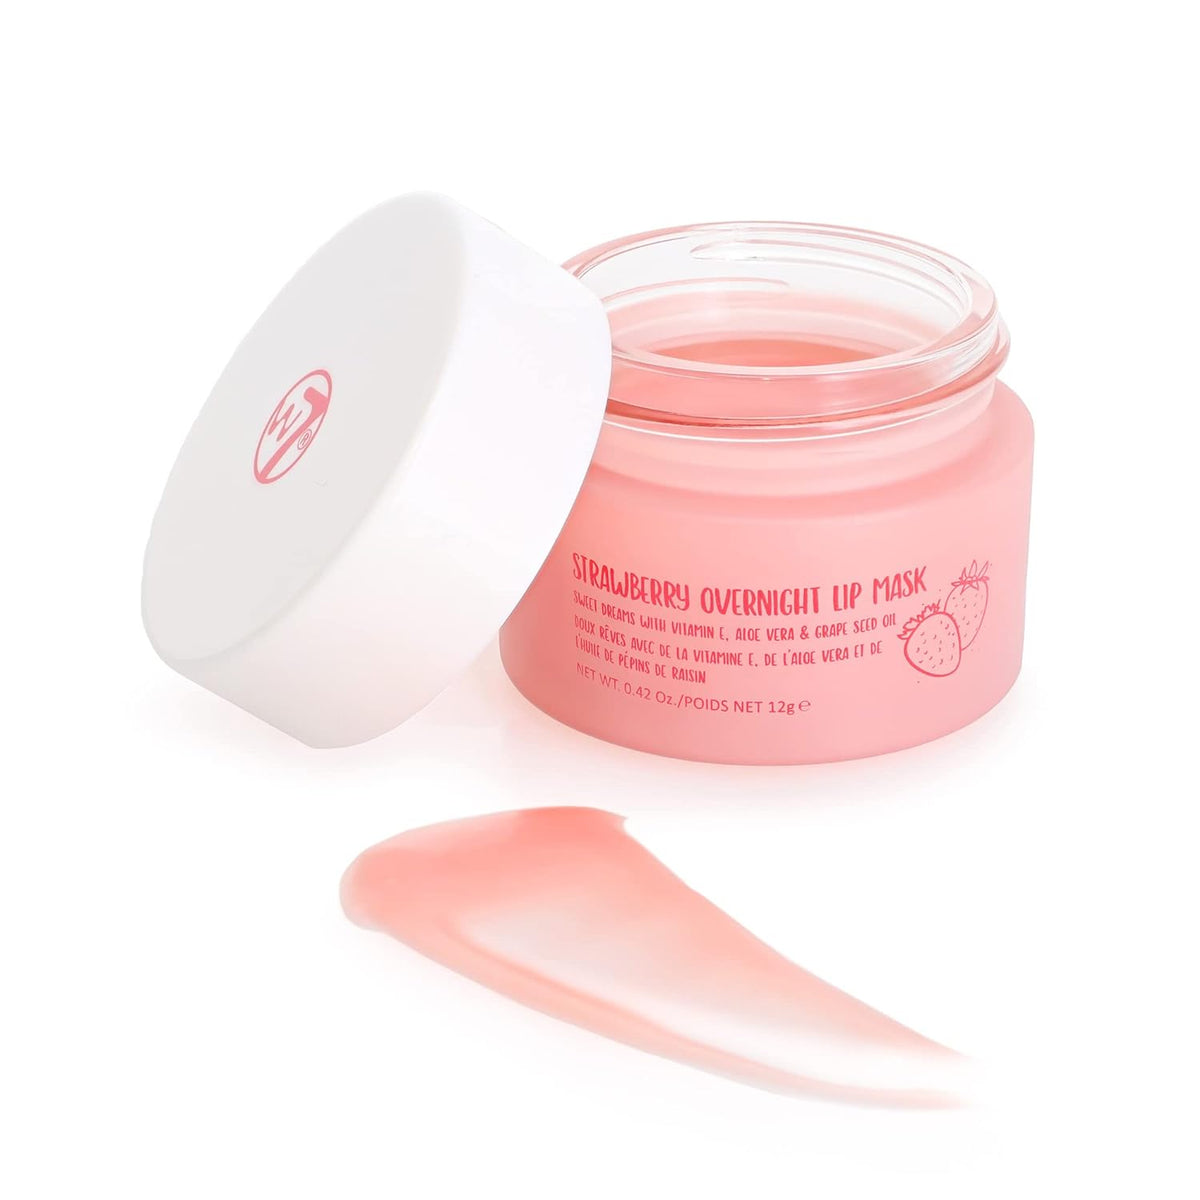 Sweet Dreams Overnight Strawberry Lip Mask - Vitamin E, Aloe Vera and Grape Seed Oil - for Hydrated, Full Looking & Irresistible Lips